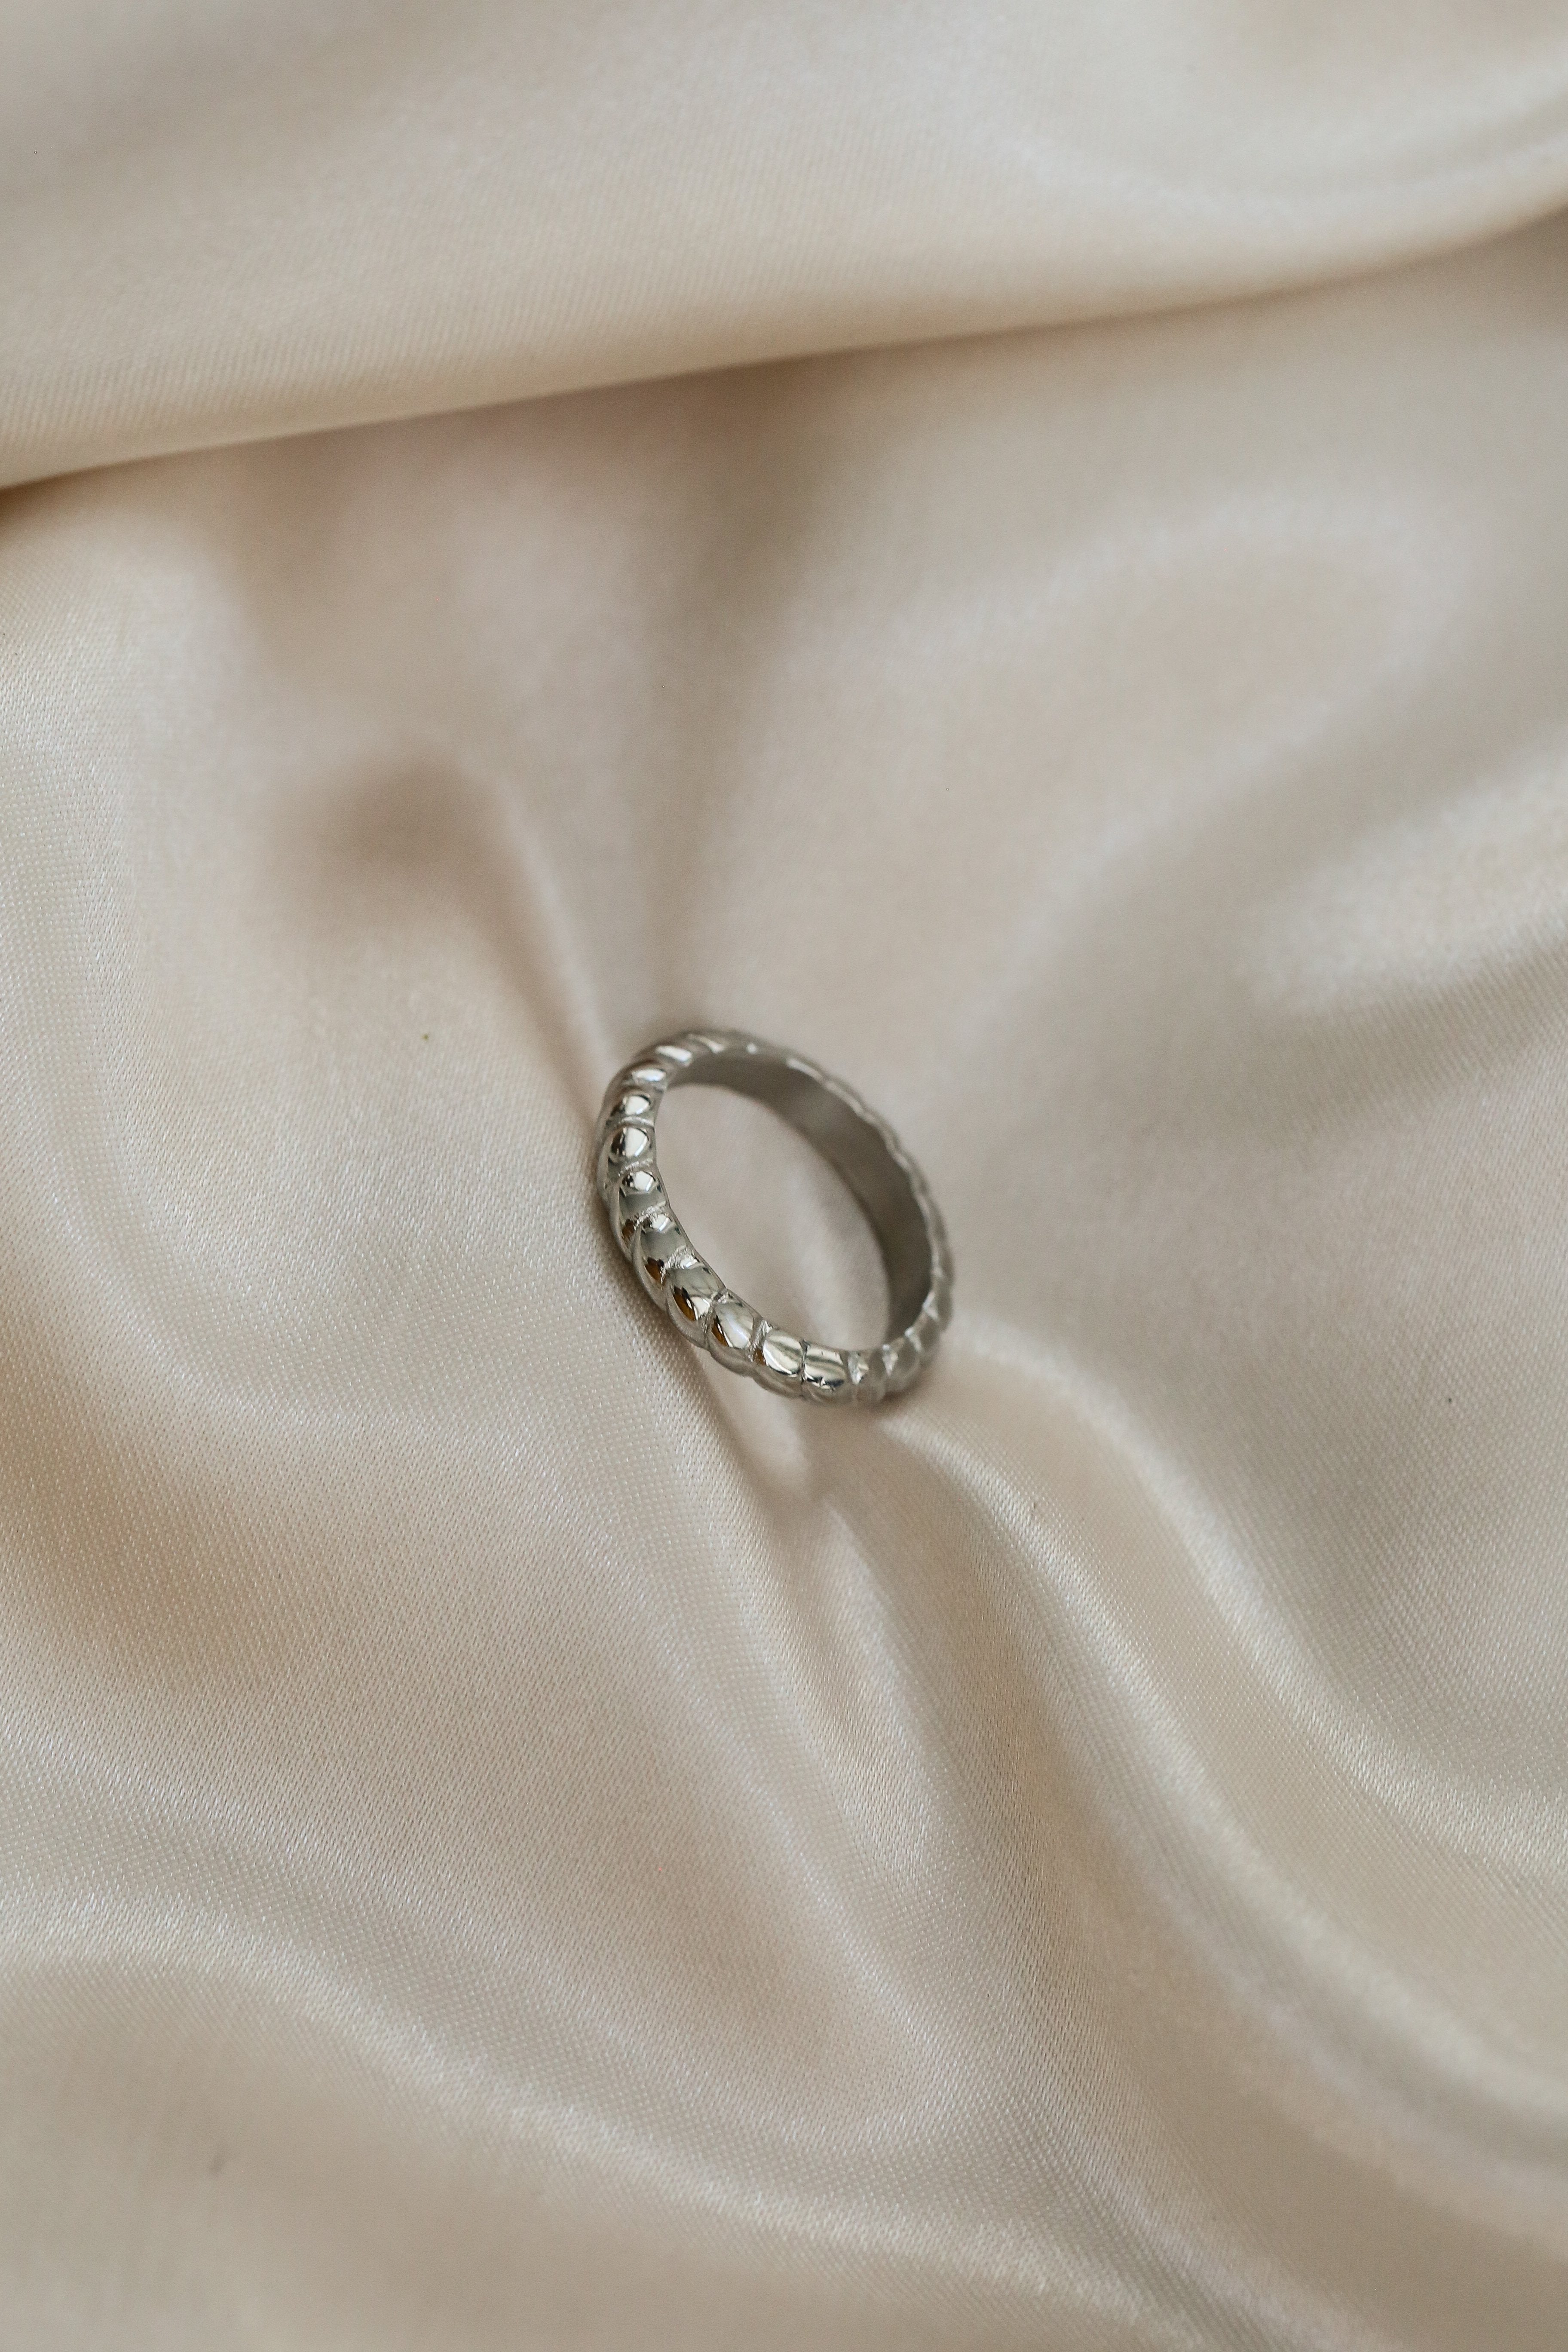 Estelle Ring - Boutique Minimaliste has waterproof, durable, elegant and vintage inspired jewelry